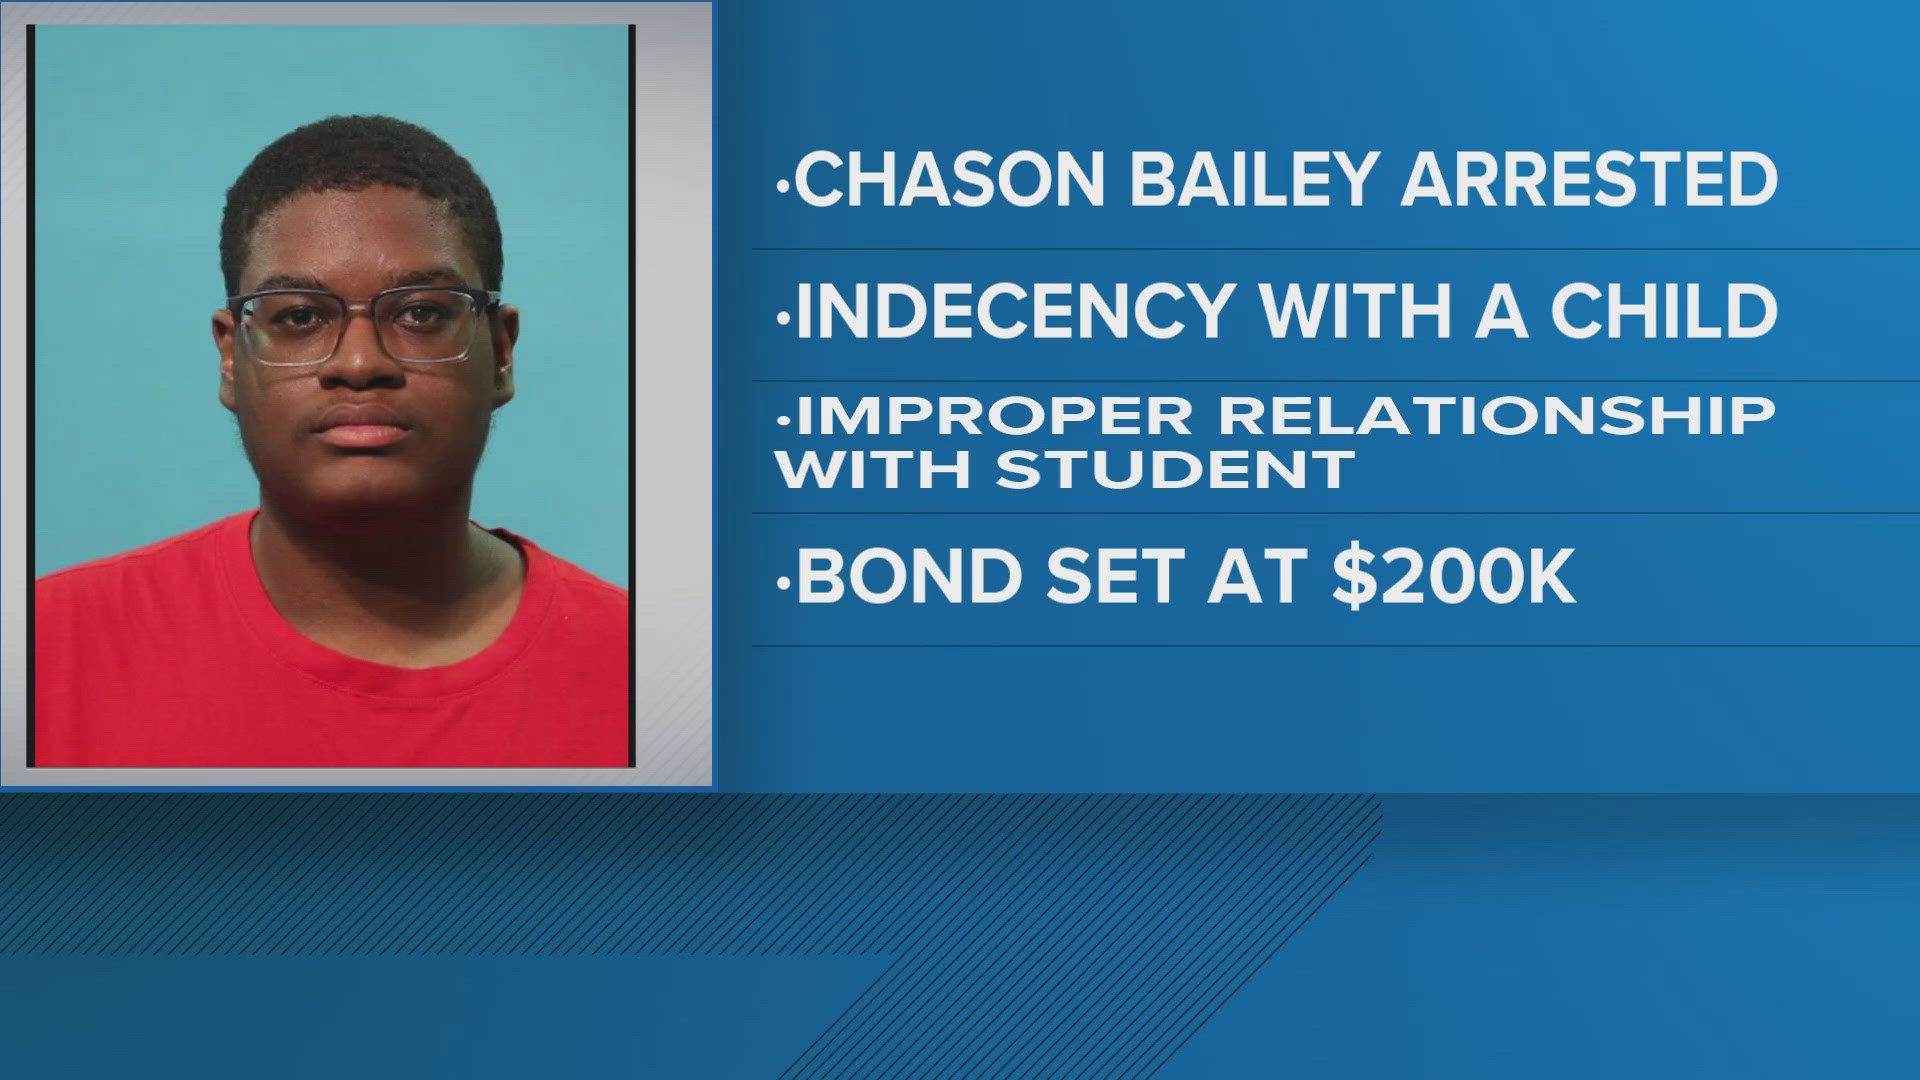 Chason Bailey, former staff member at EC Mason Elementary, is charged with indecency with a child and an improper relationship between an educator and a student.